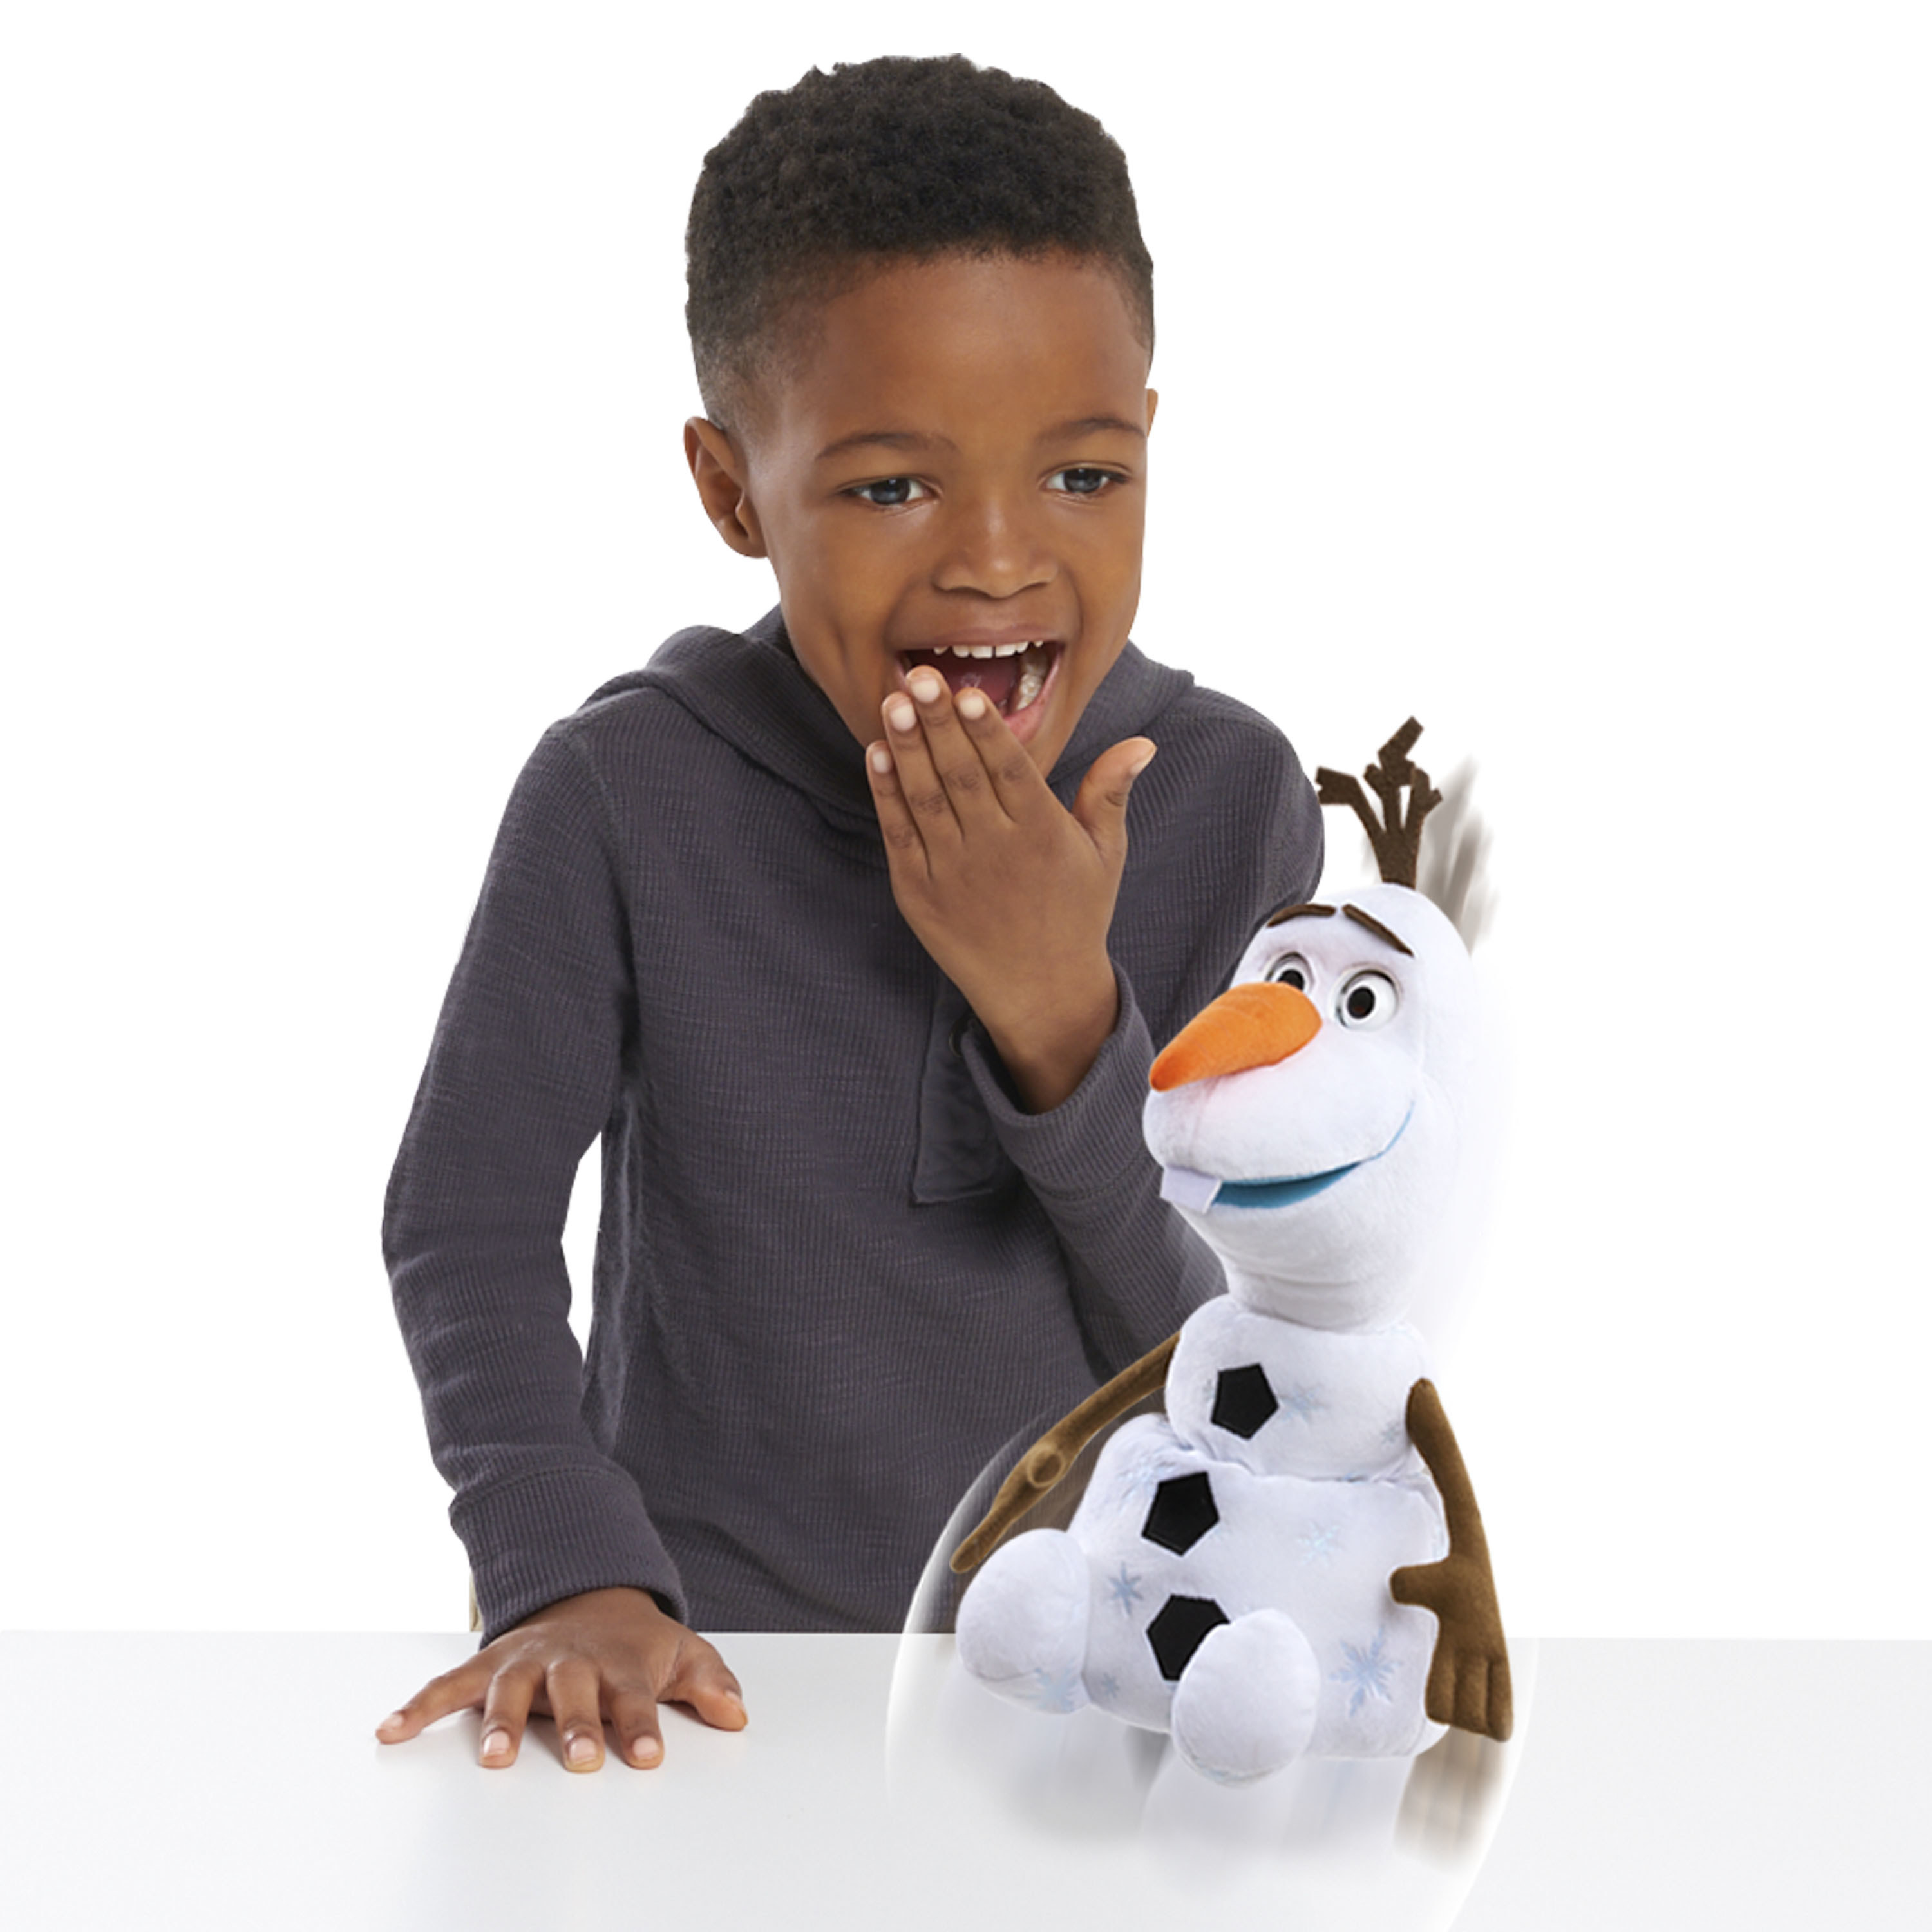 child laughing at an olaf toy that is moving around